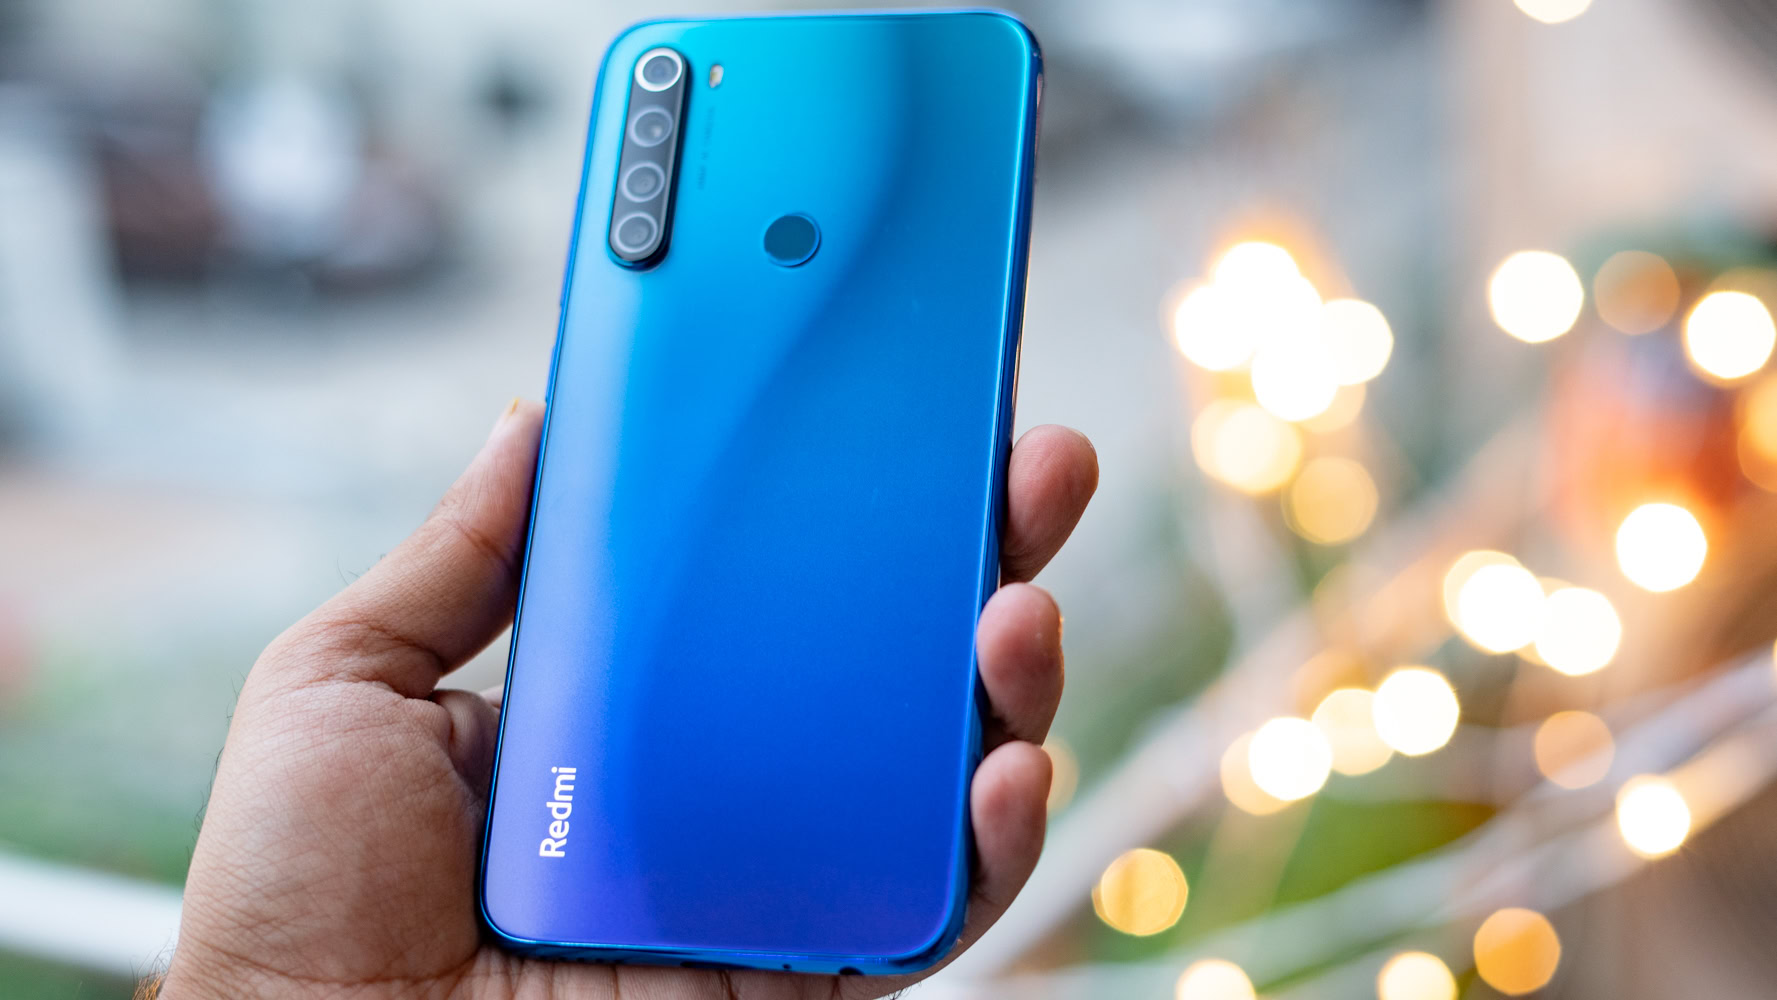 Redmi Note 8 review: A quality mid-range smartphone - Android Authority